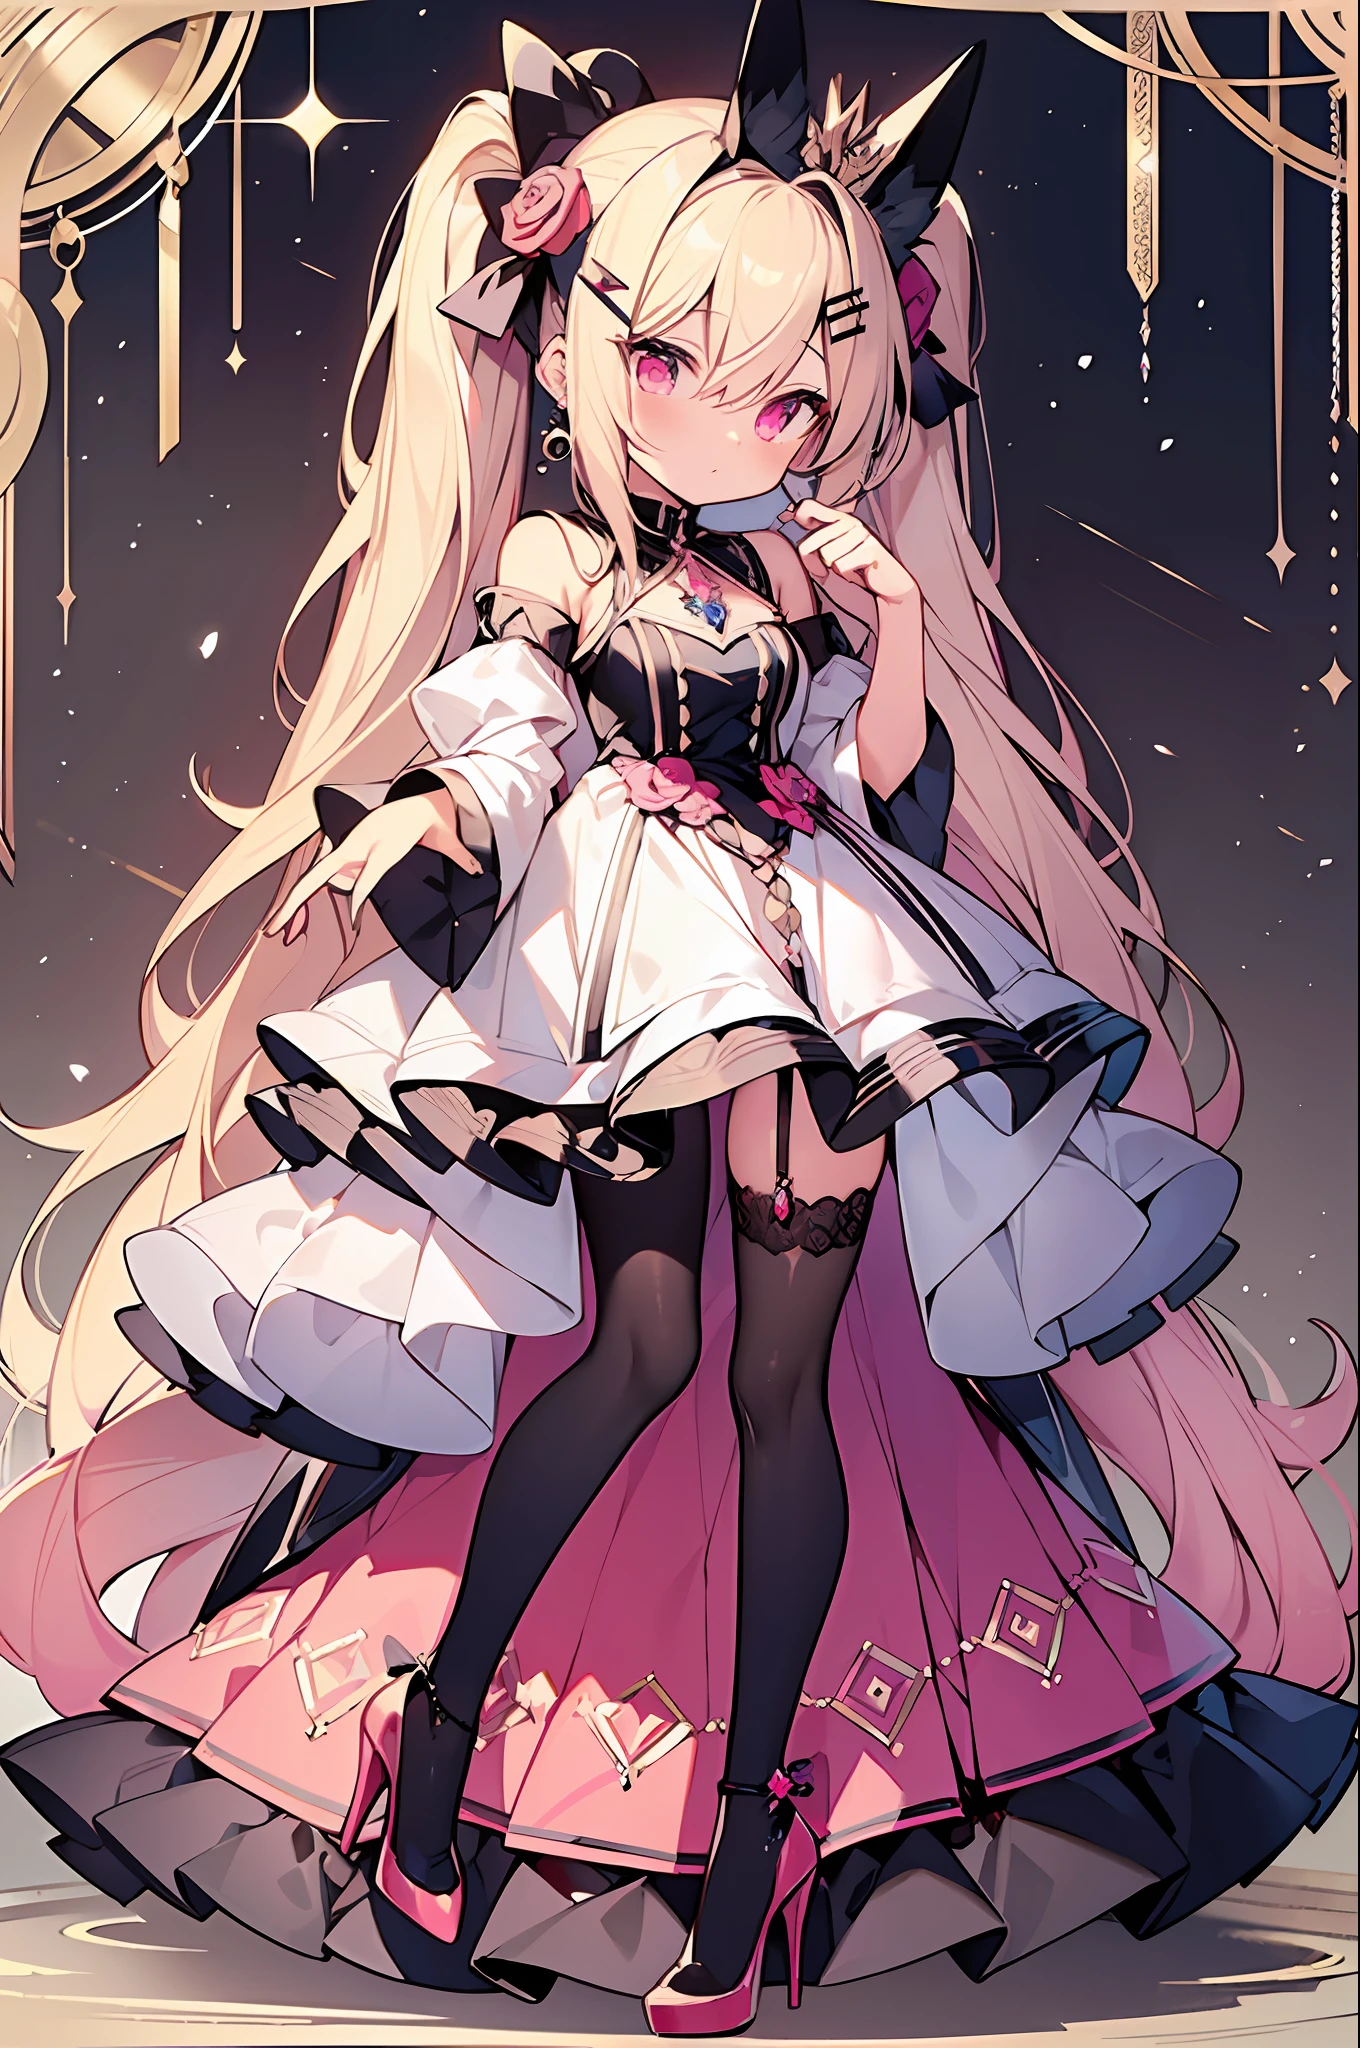 ((masterpiece, best quality)), a maiden, standing full body main view blonde hair, double ponytail, pink eyes, bangs between the eyes fox ears, black white and rose red clothing, clothing style: dress, hair ornaments are bows, crystal pendants, high heels, white stockings